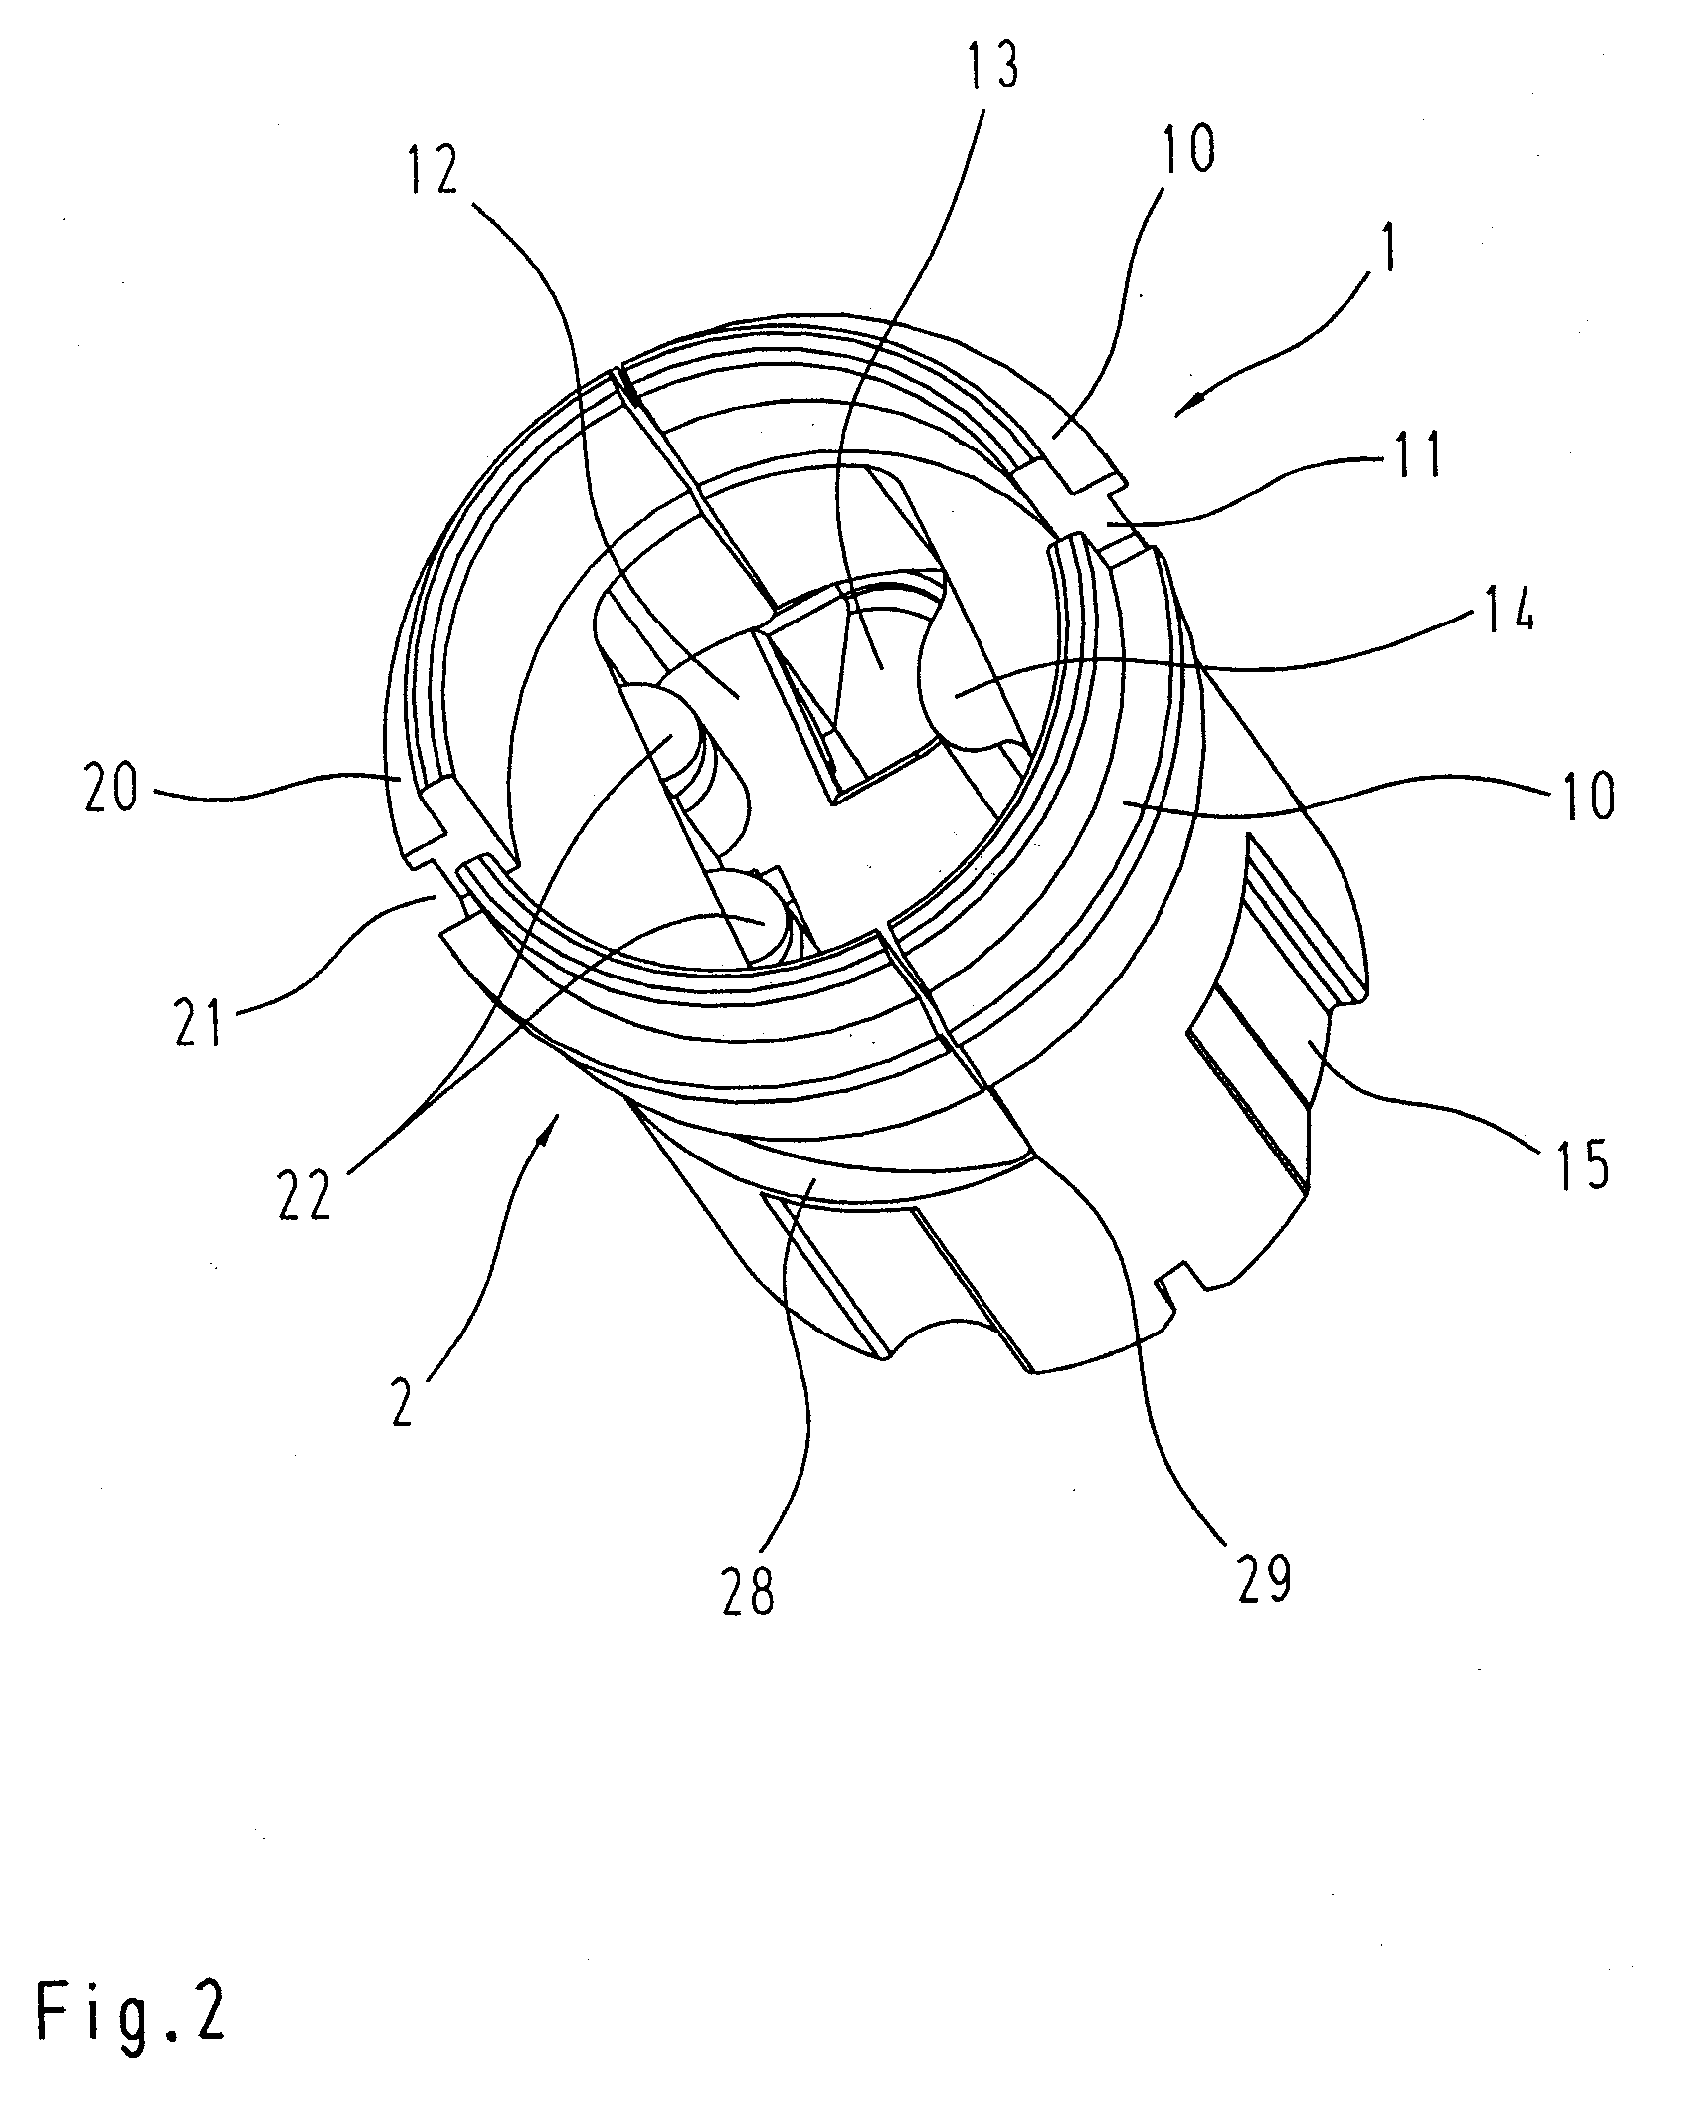 Contact element for shielded connectors